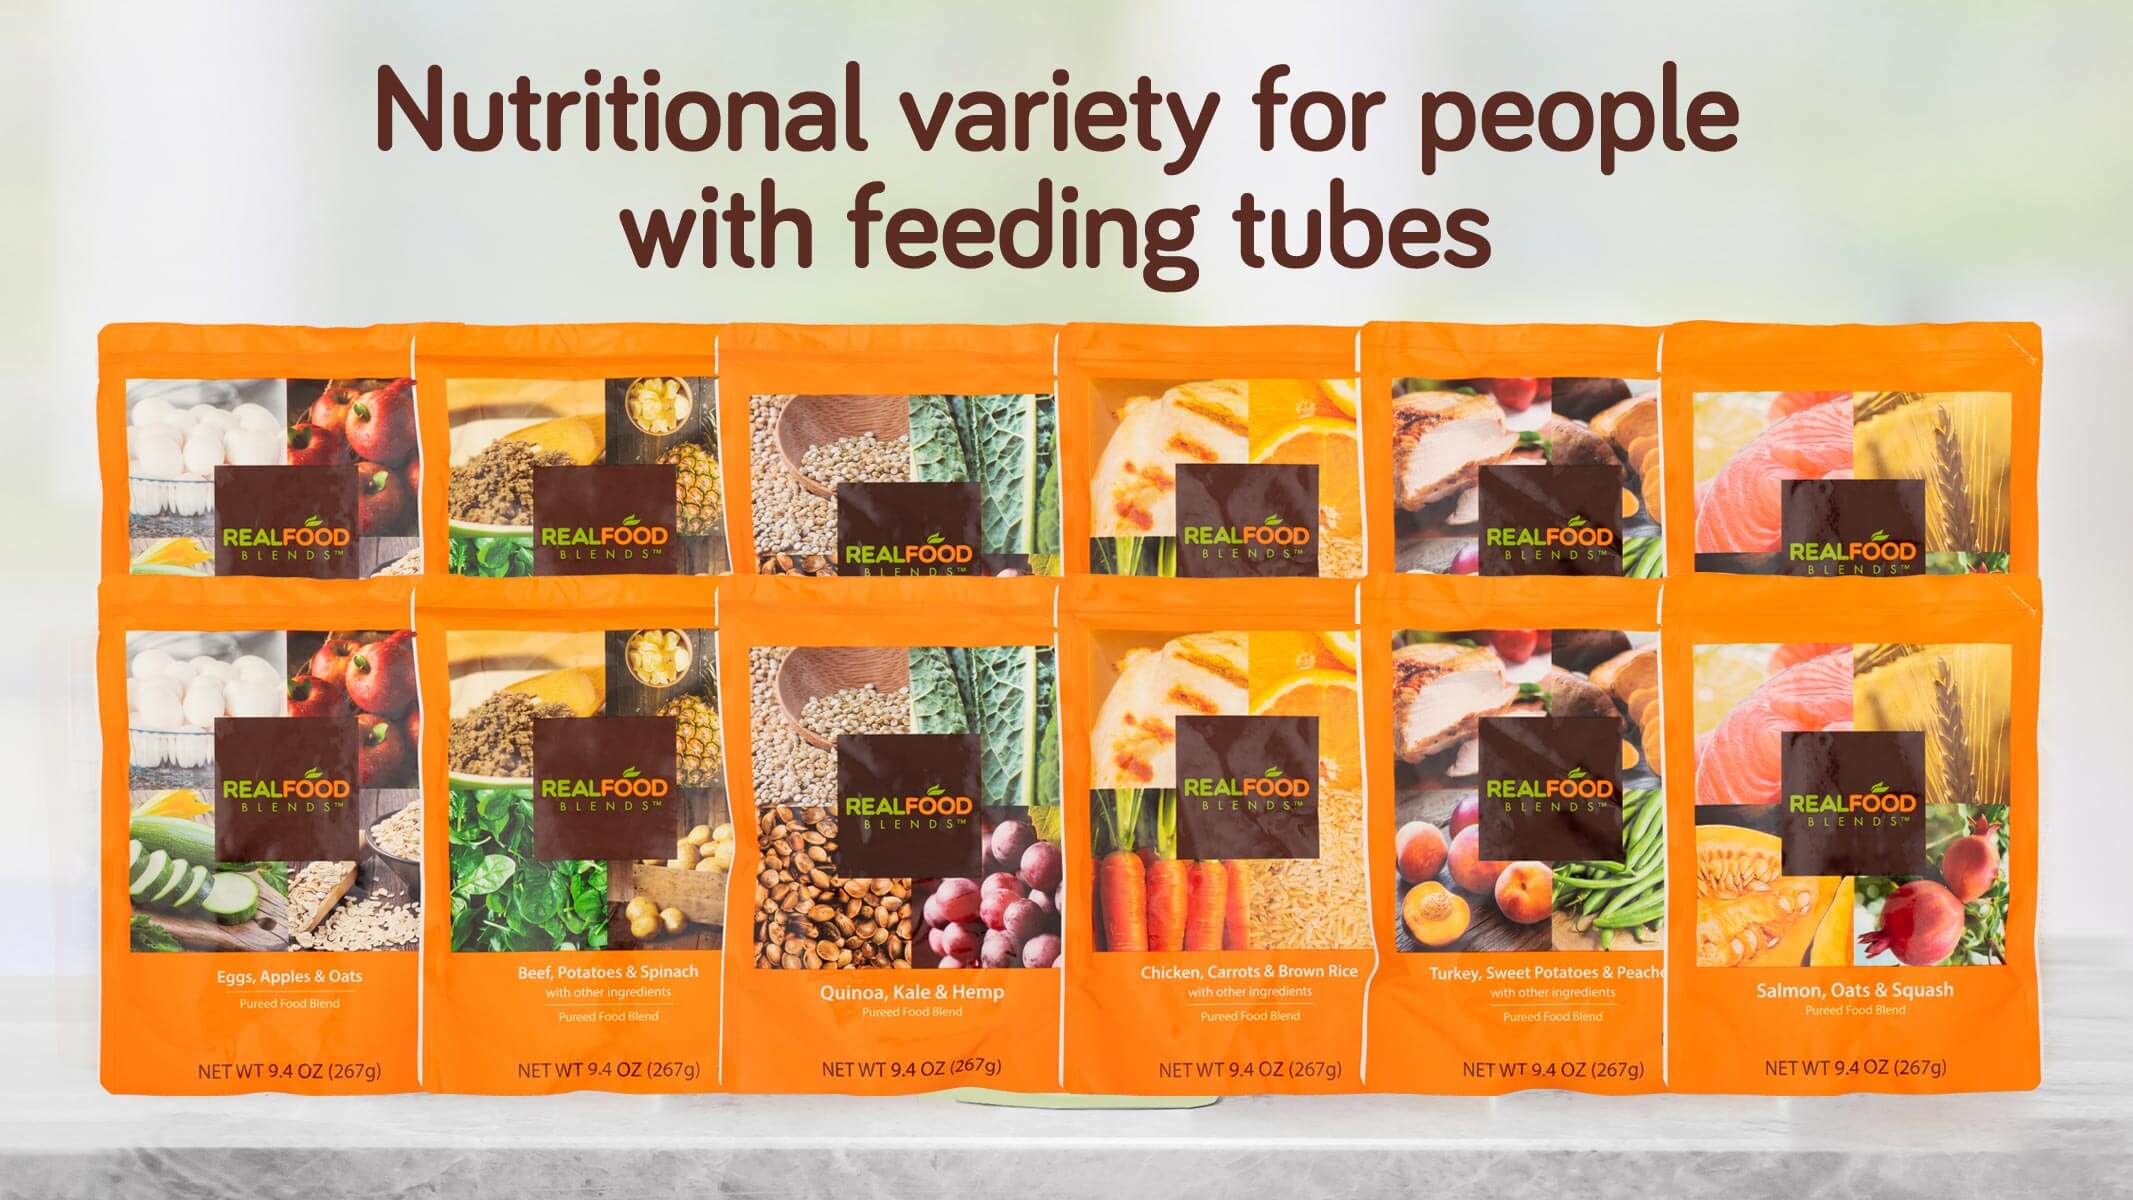 Real Food Blends Turkey, Sweet Potatoes & Peaches - Pureed Food Meal for  Feeding Tubes, 9.4 oz Pouch (Pack of 12 Pouches)